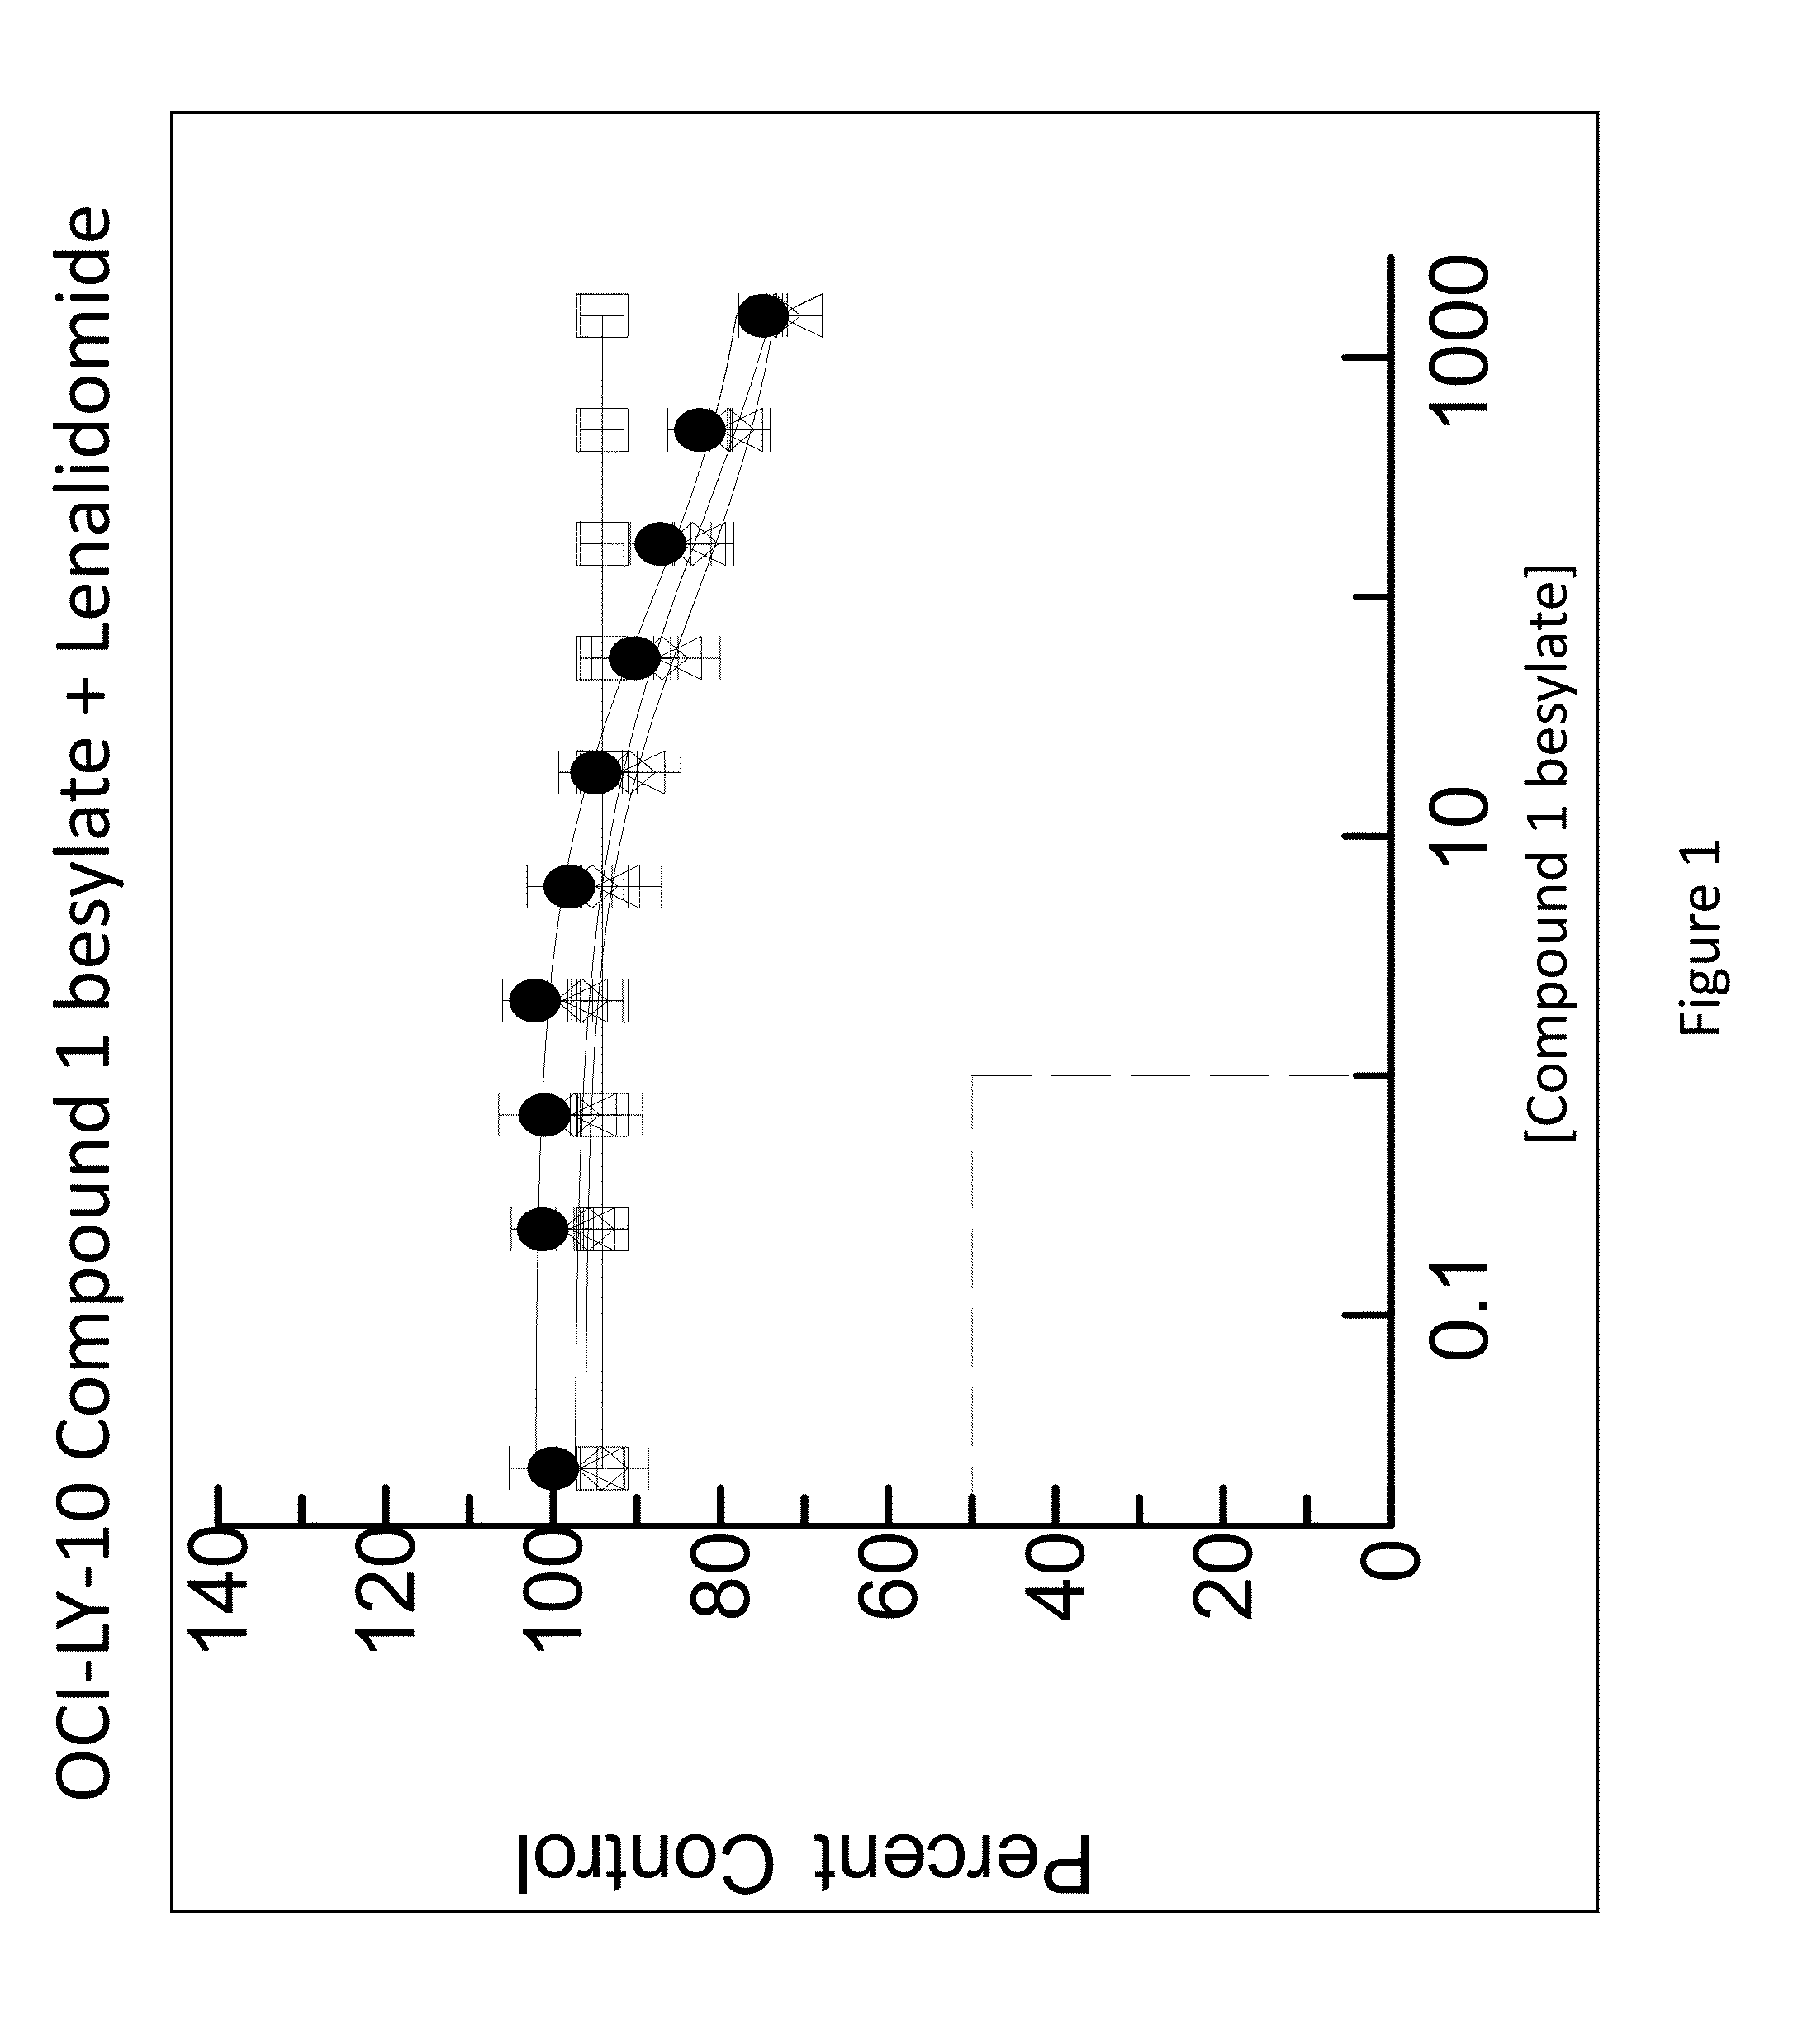 Methods of treating a disease or disorder associated with bruton's tyrosine kinase